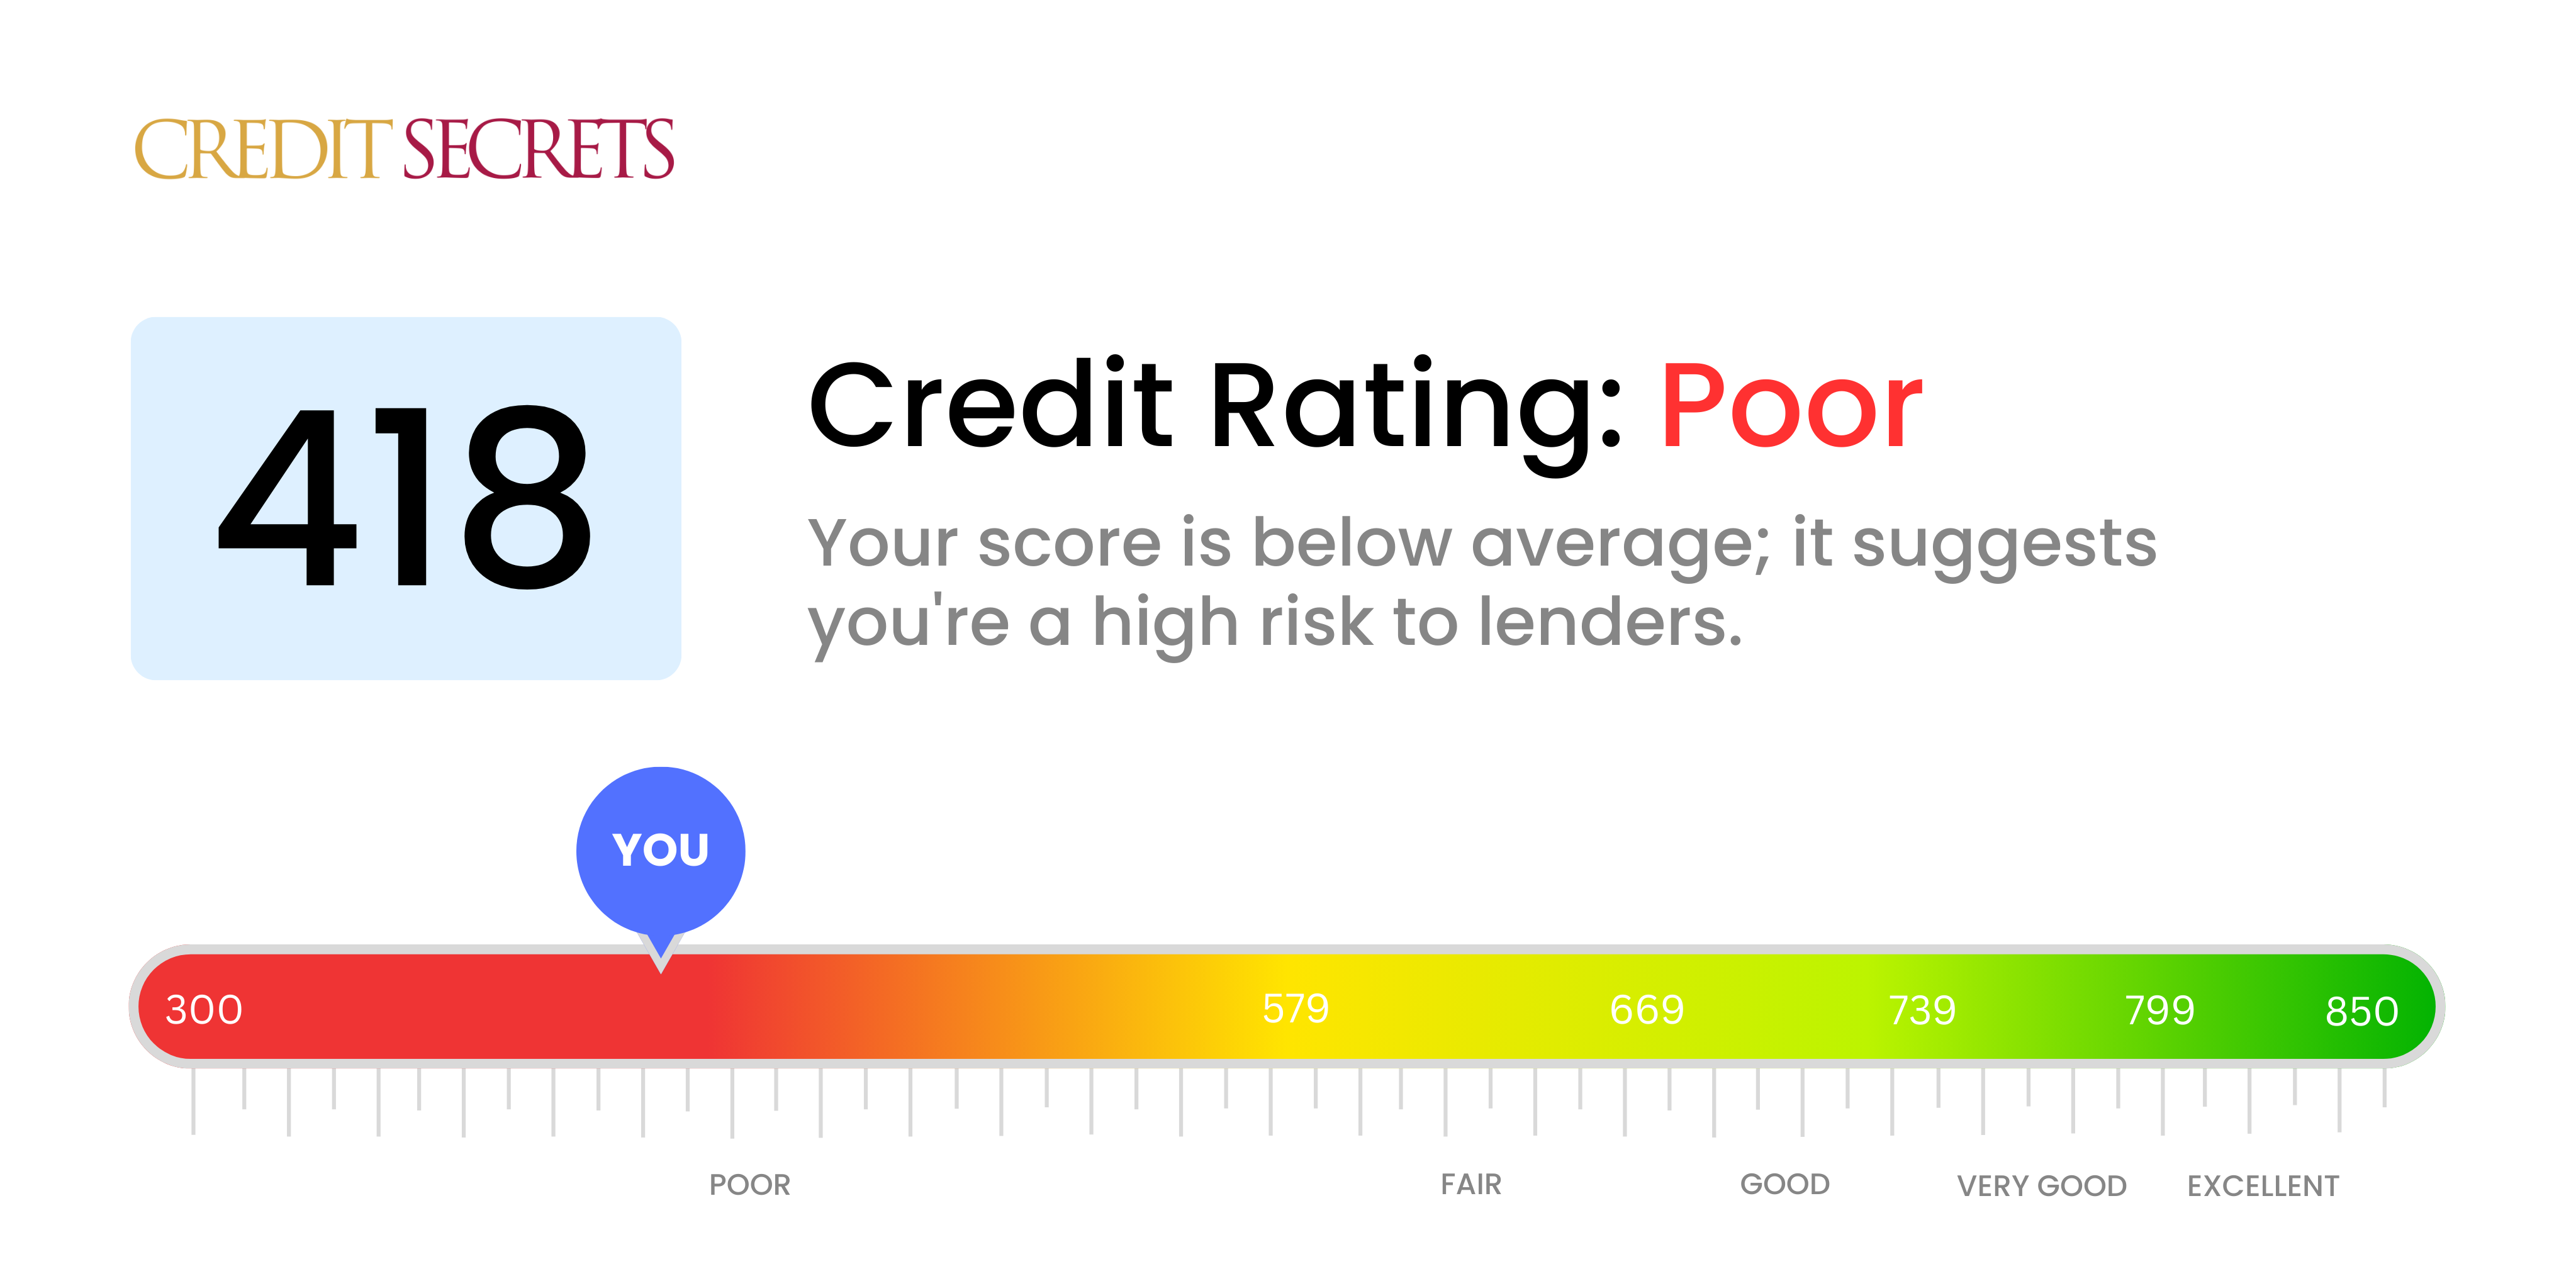 Is 418 a good credit score?